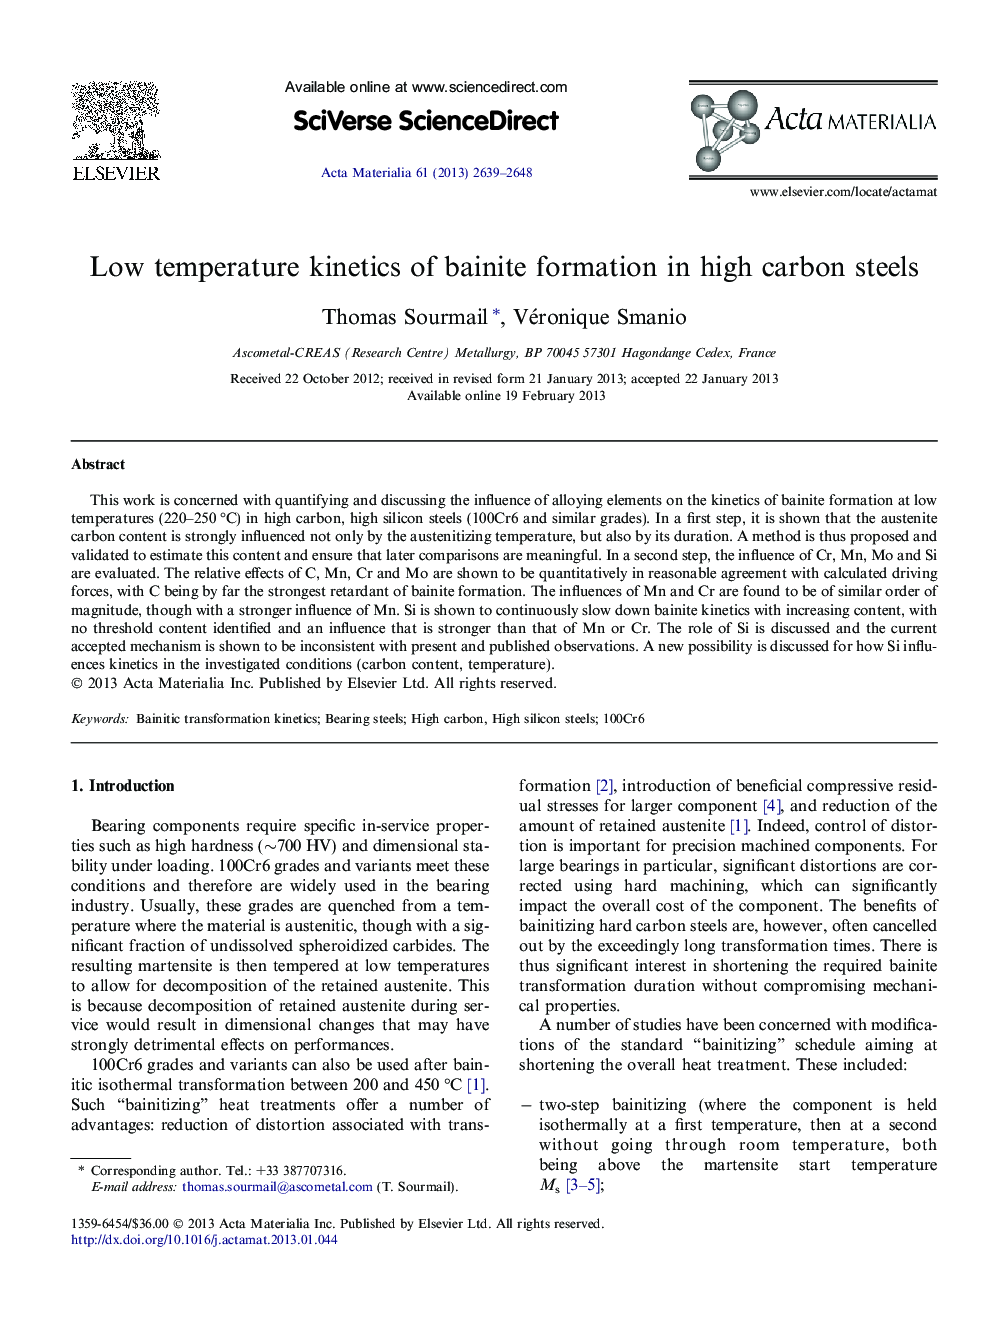 Low temperature kinetics of bainite formation in high carbon steels